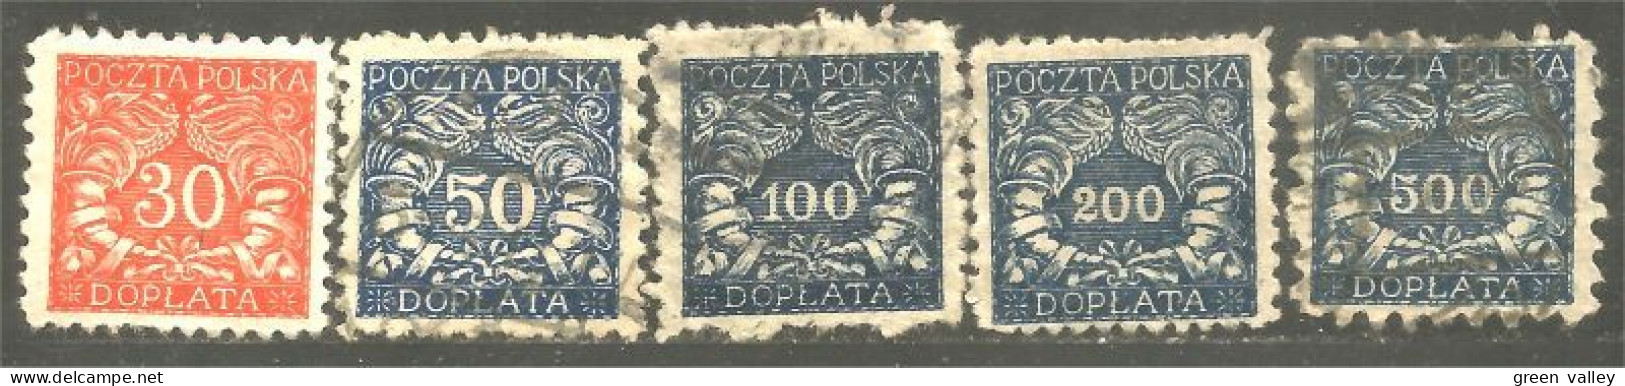 740 Pologne Taxe Postage Due 1919-1920 (POL-328) - Postage Due